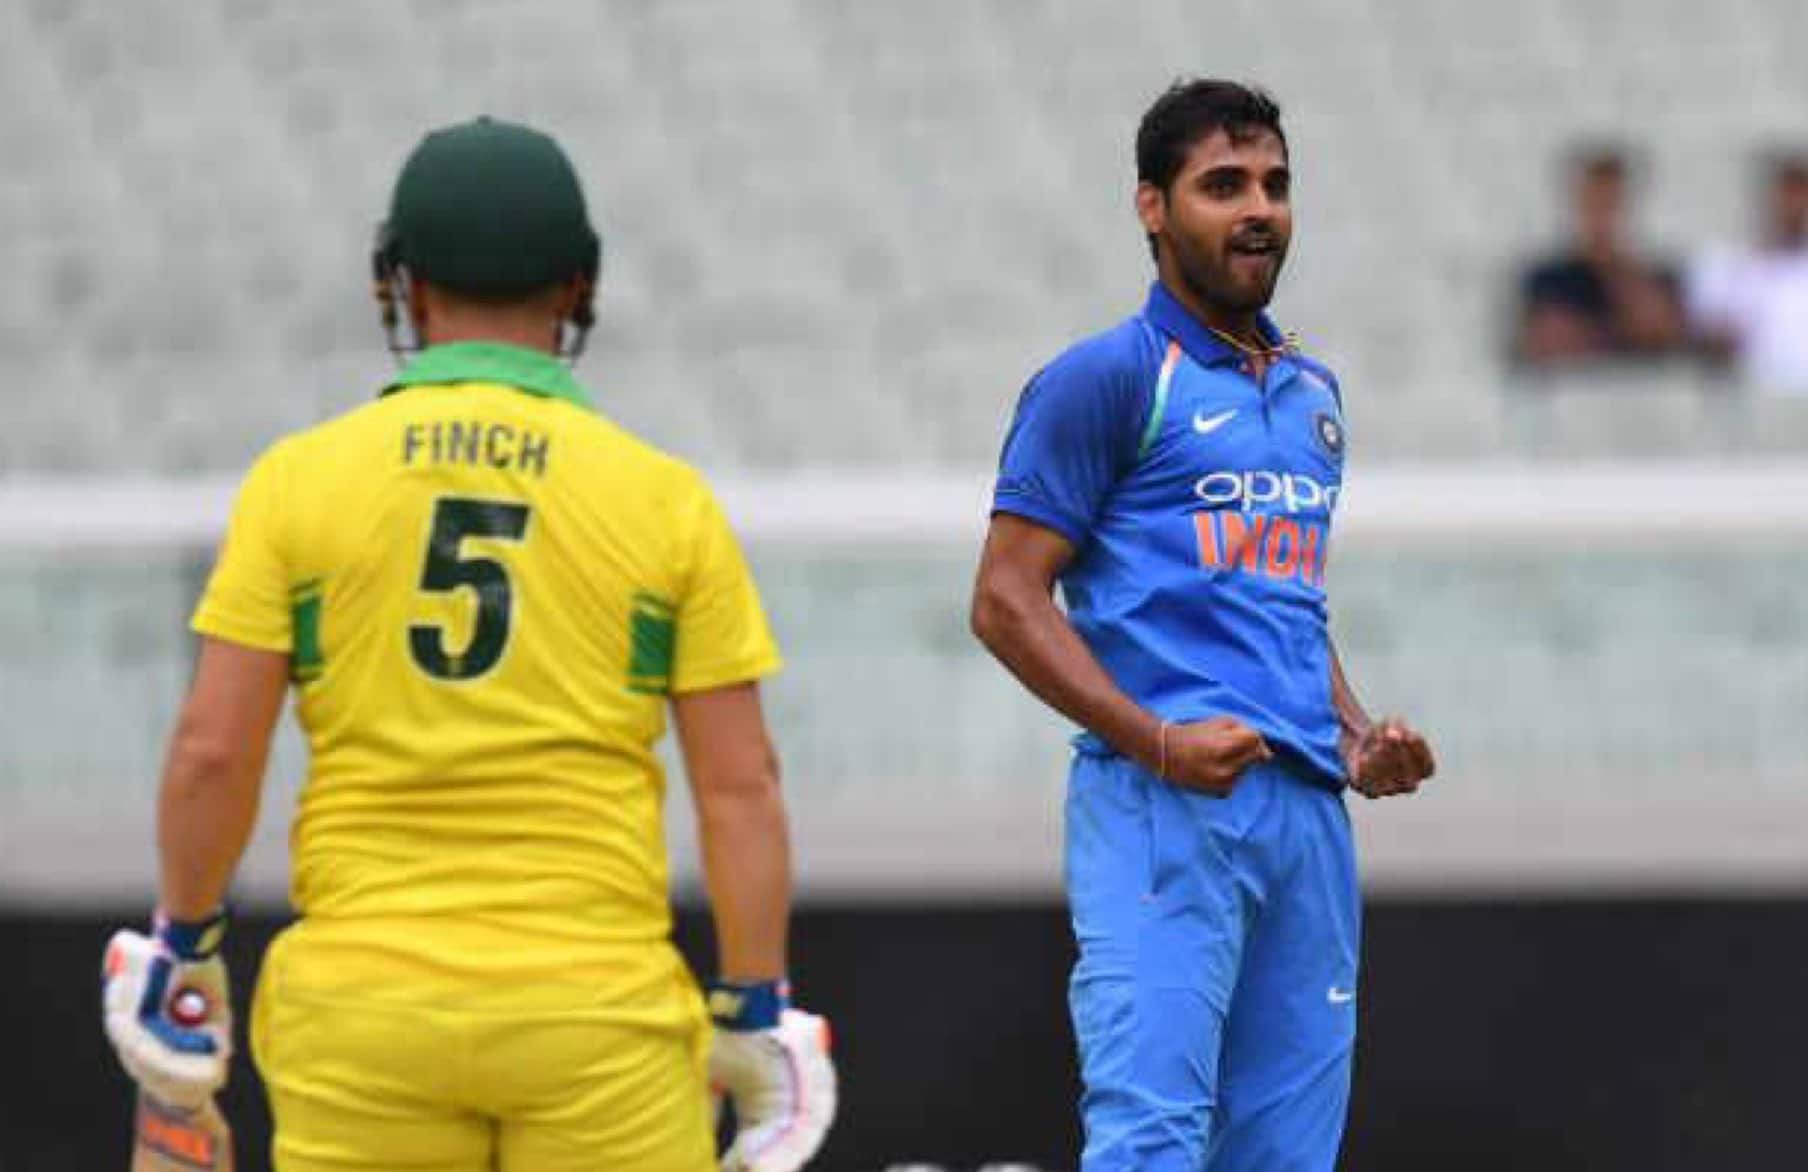 'Tried For 15 Years to Stop That...': Aaron Finch Opens up on Being Troubled by Bhuvneshwar Kumar